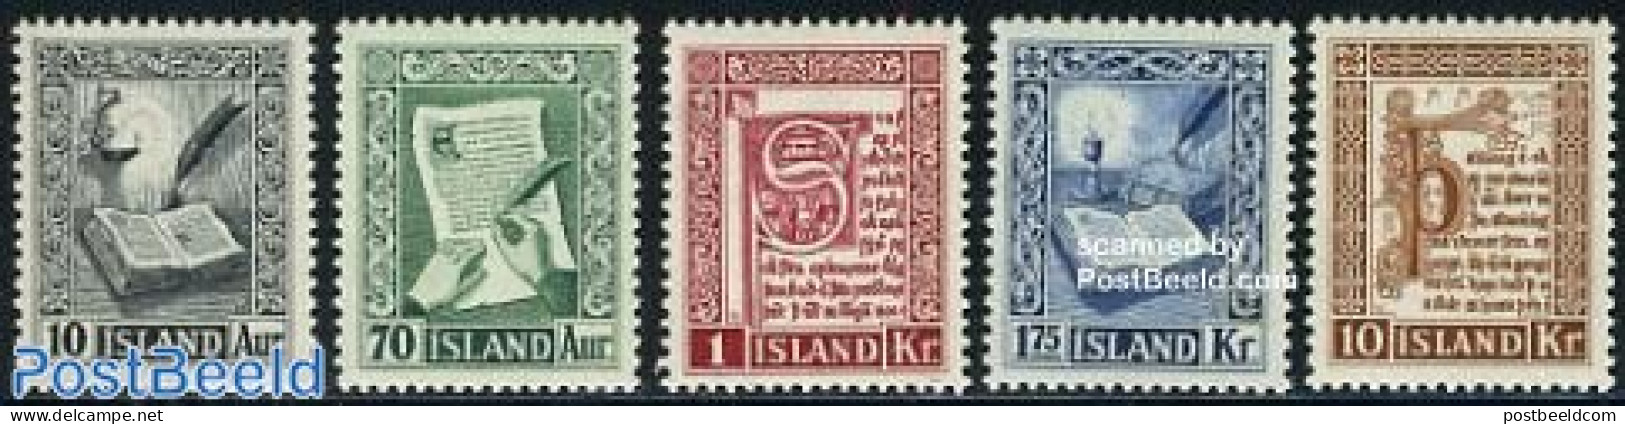 Iceland 1953 Old Manuscripts 5v, Mint NH, Art - Books - Handwriting And Autographs - Unused Stamps